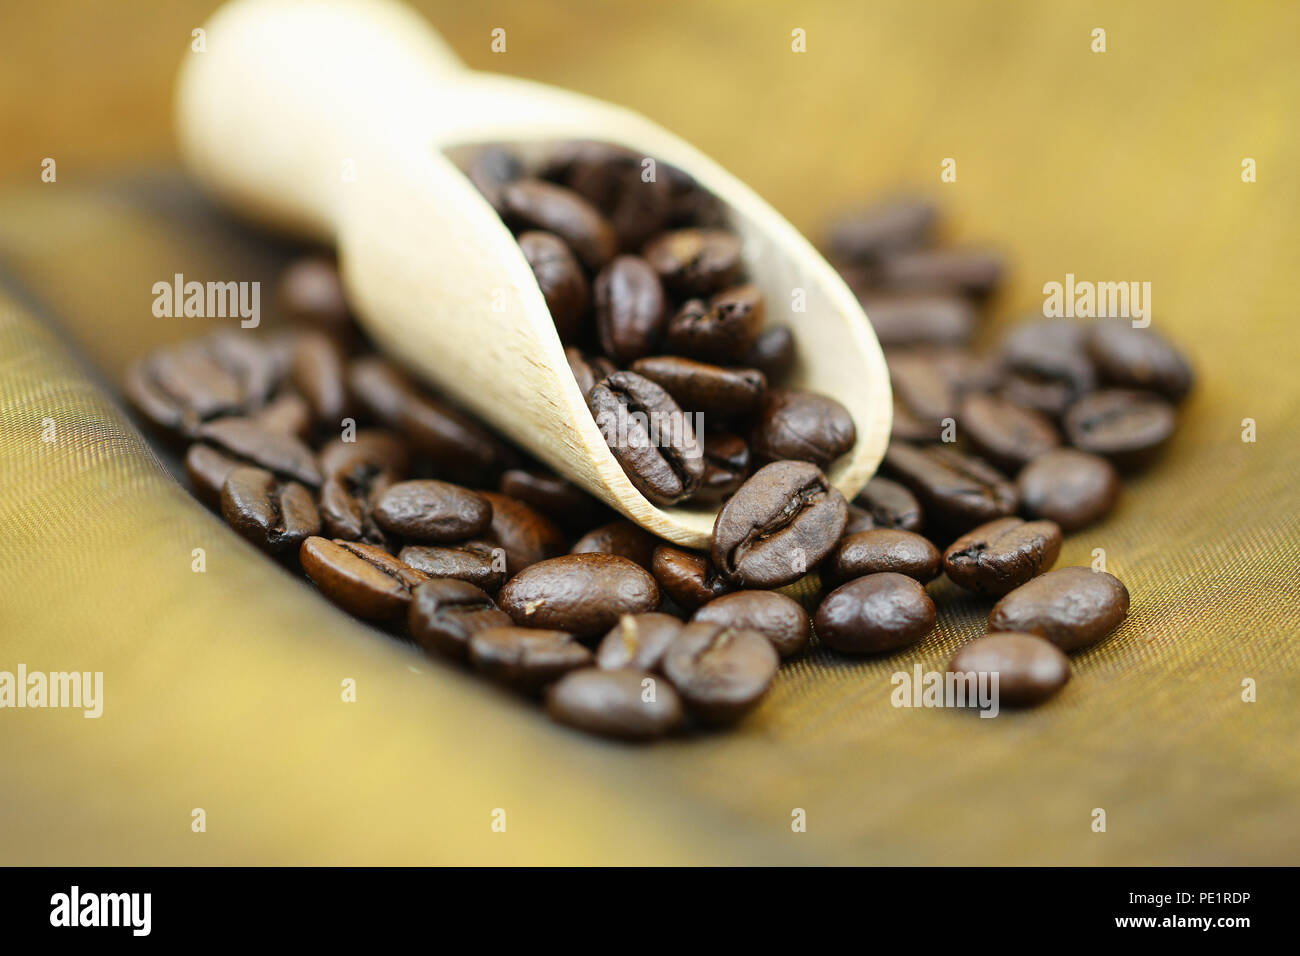 Roasted coffee beans on wooden scoop, shallow DOF Stock Photo